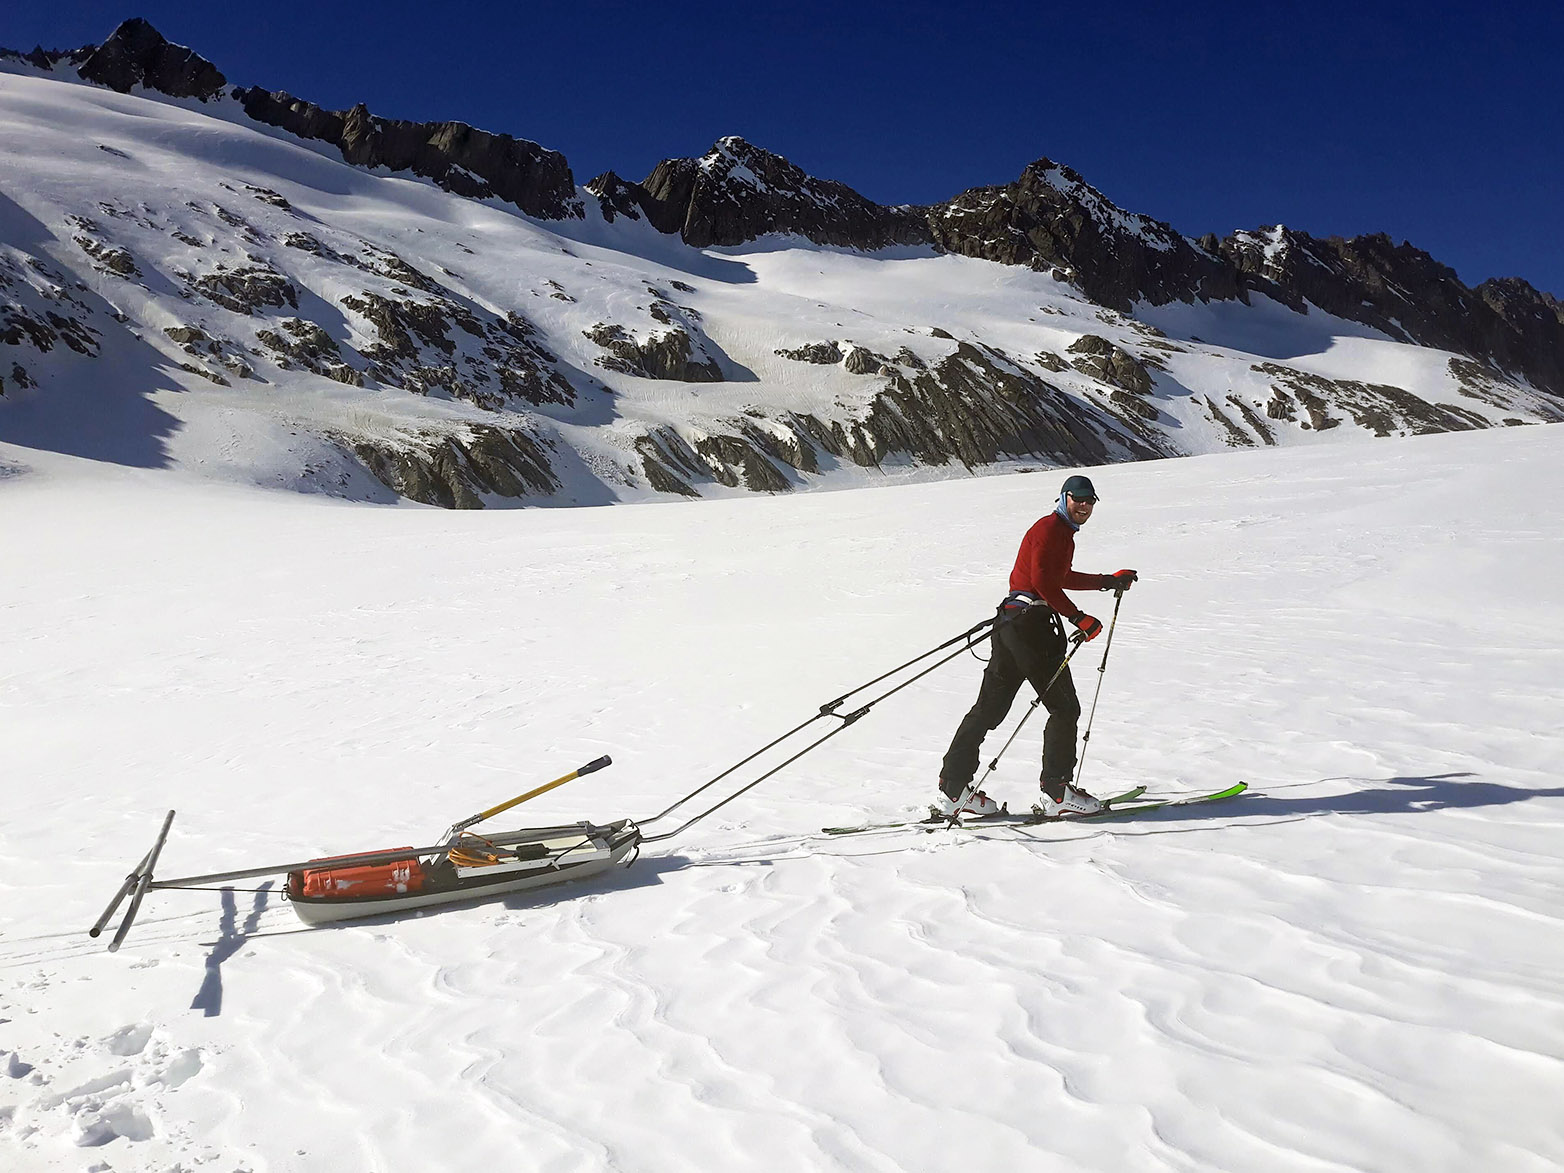 Enlarged view: The easiest way to move was on skis: a researcher transports material and tools.